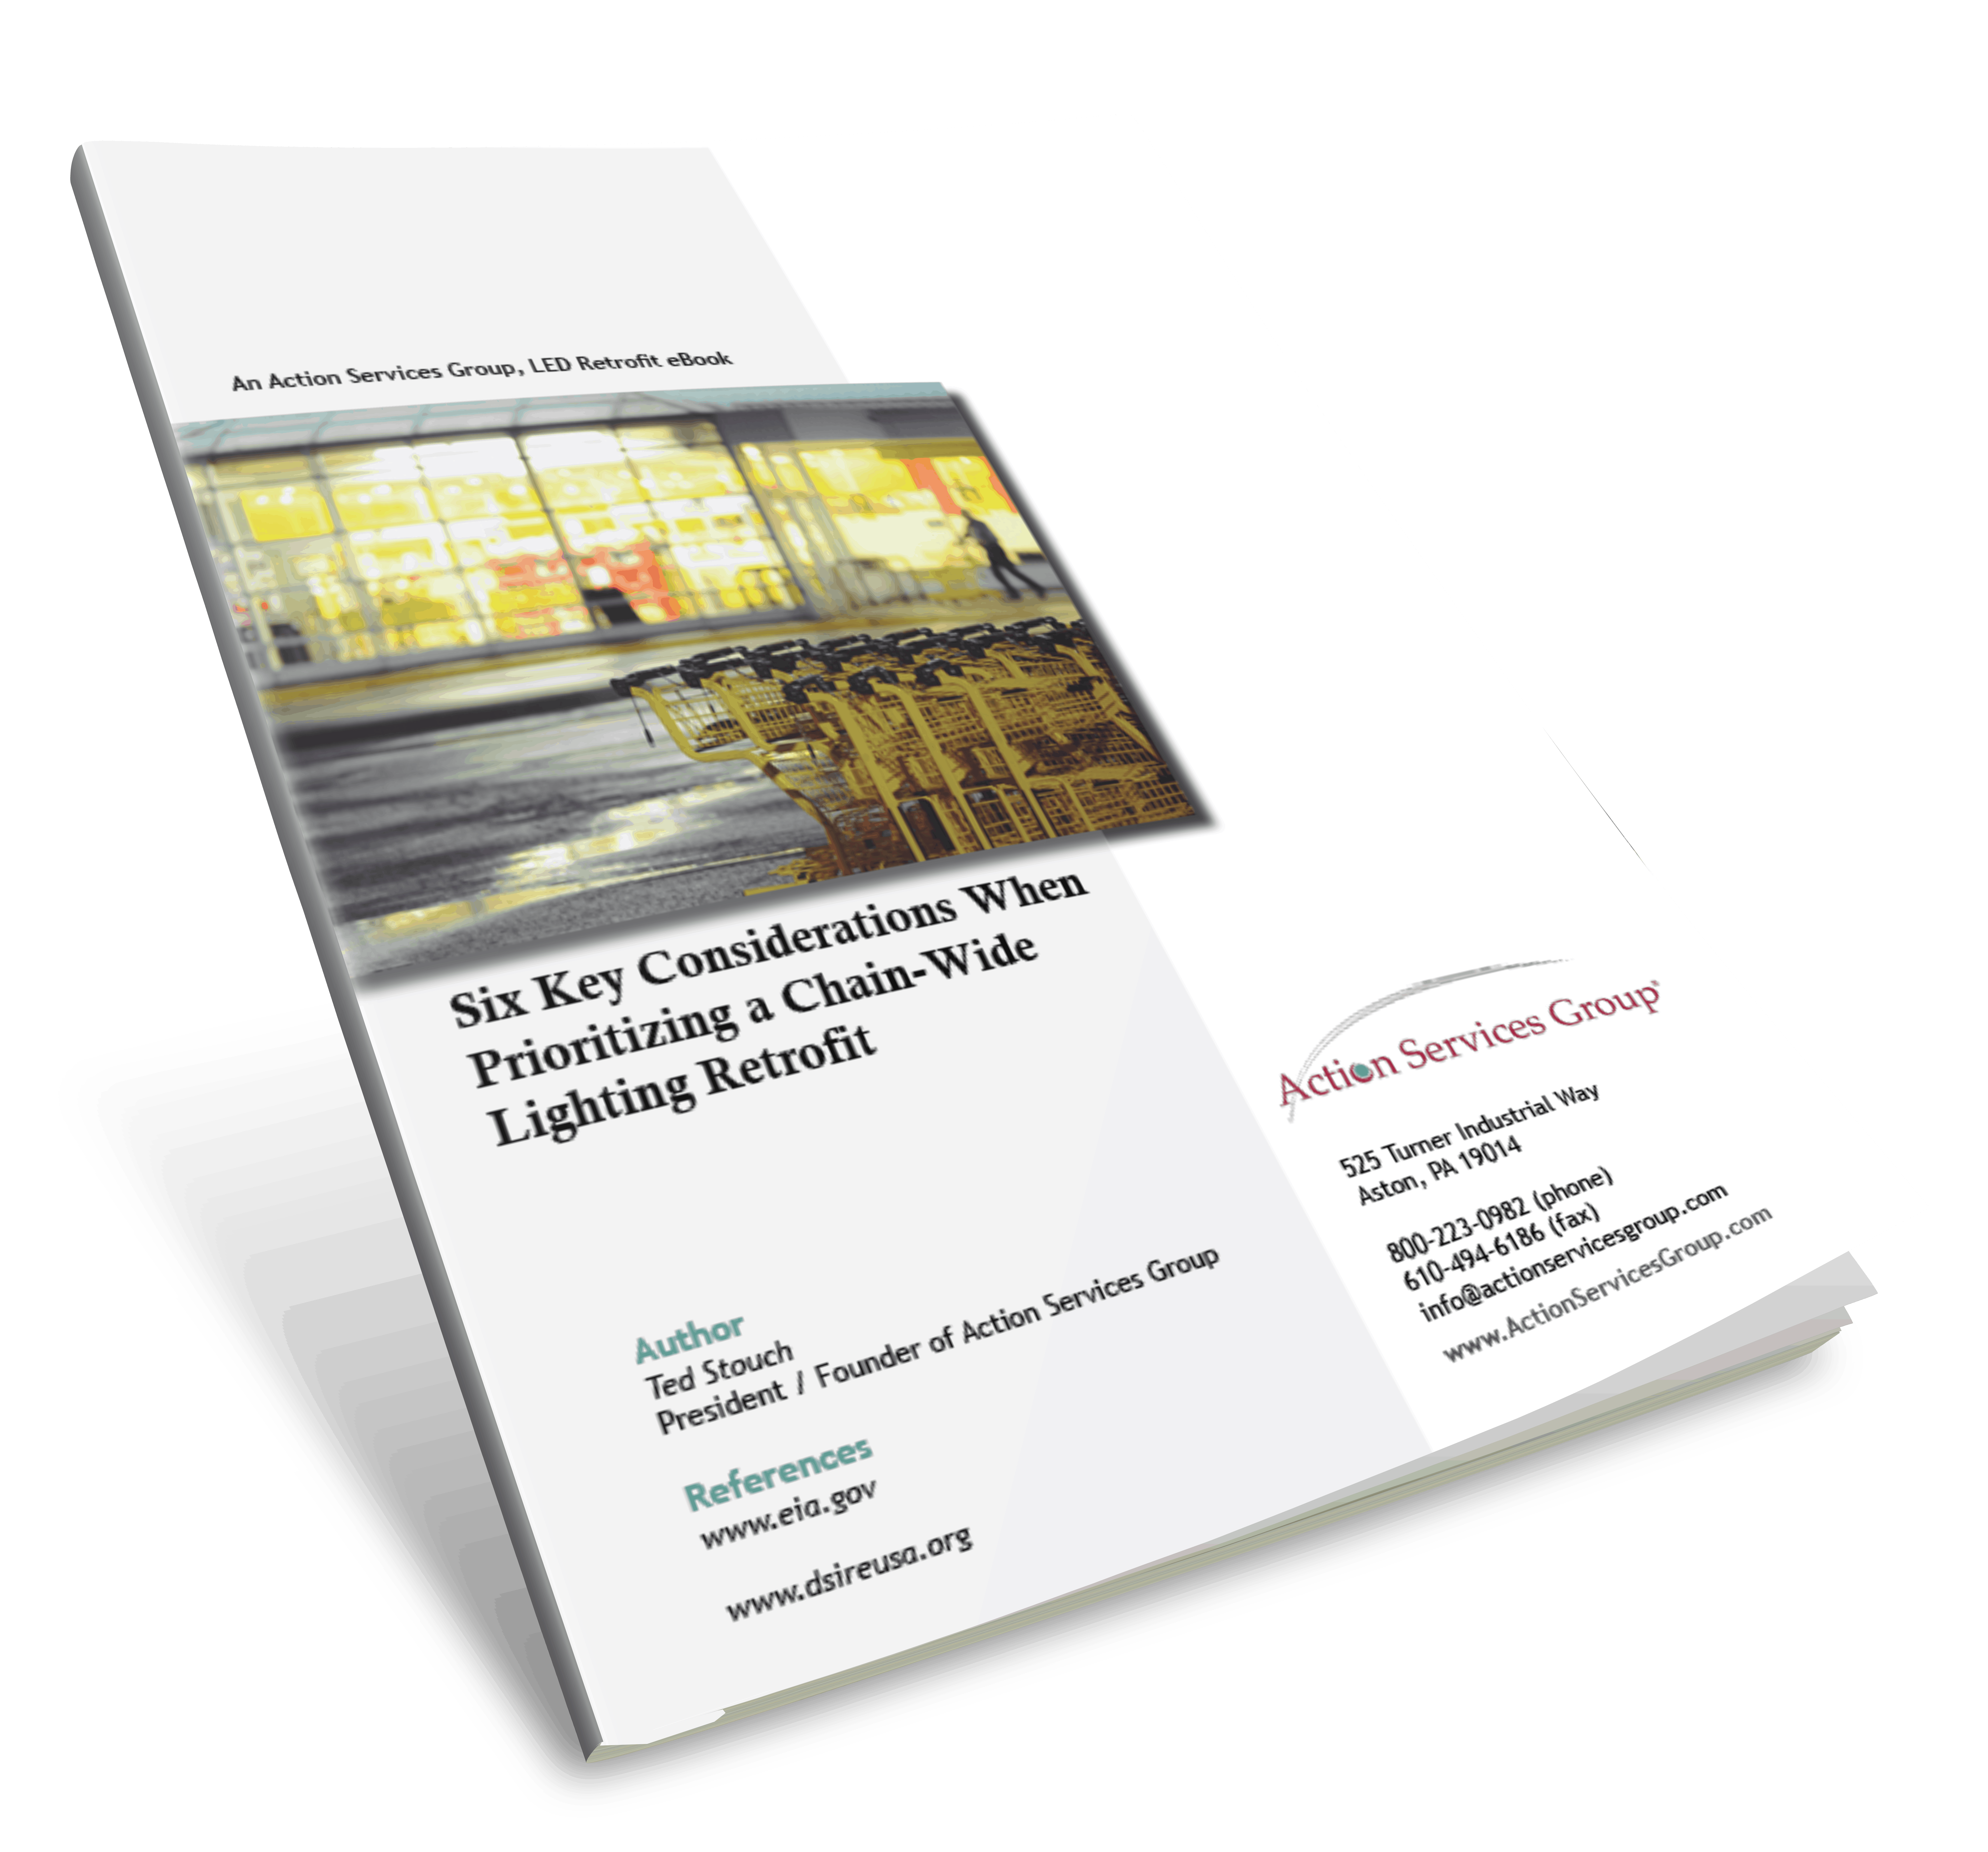 Six Key Considerations When Prioritizing a Chain-Wide Lighting Retrofit_eBook Cover Slanted